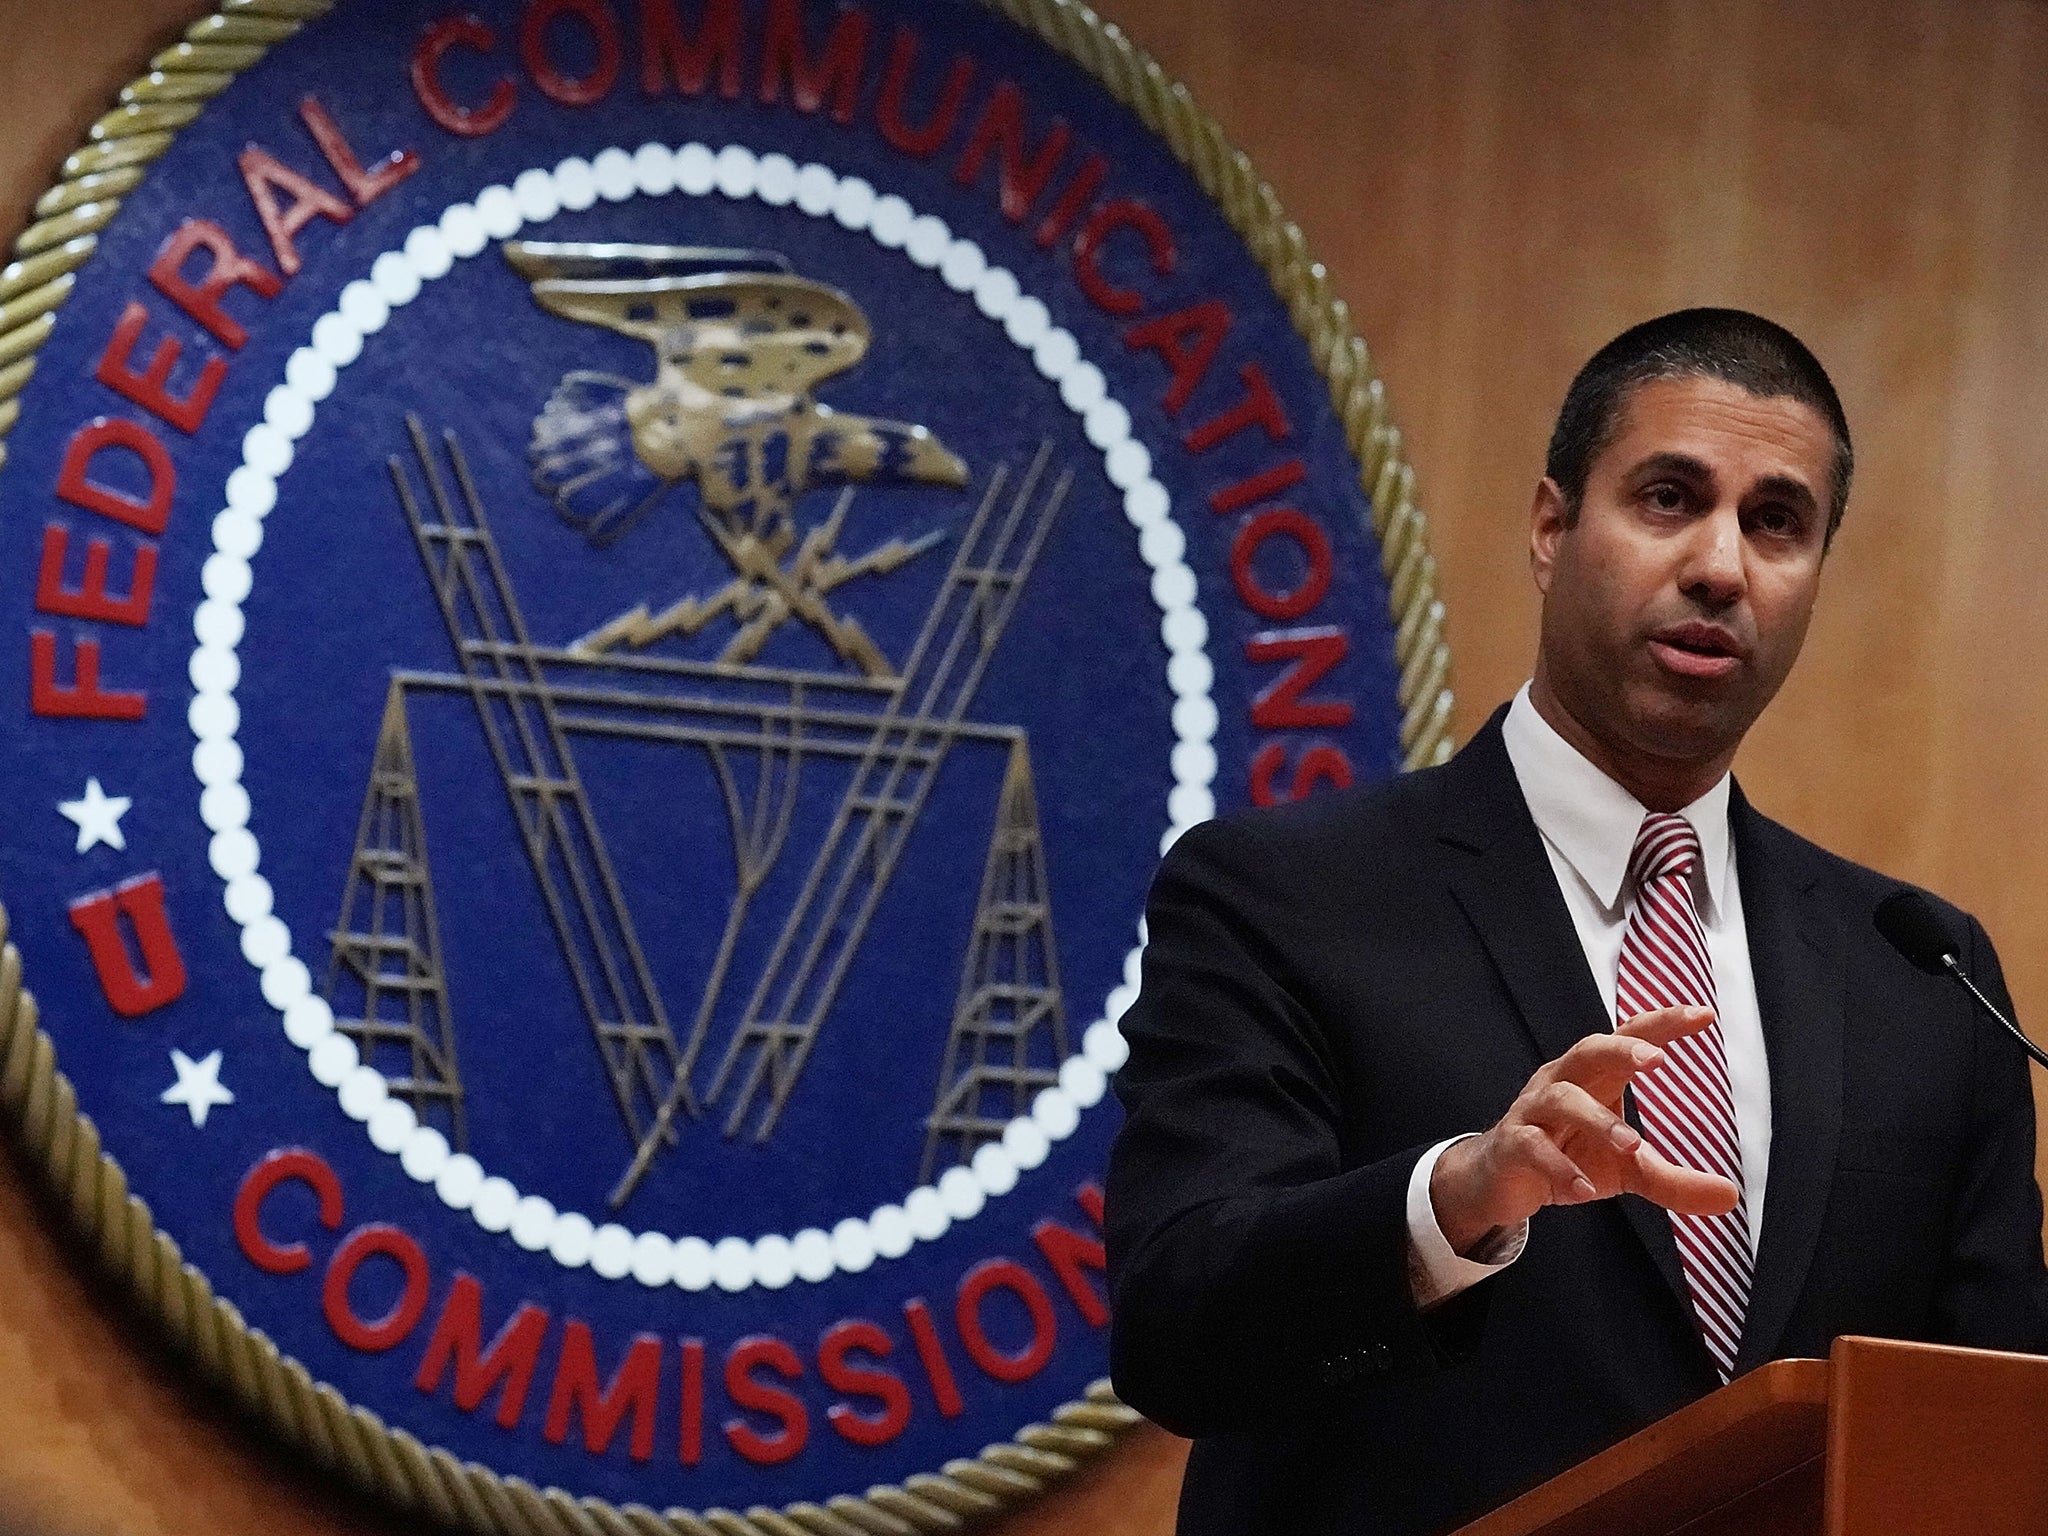 Federal Communications Commission Chairman Ajit Pai speaking to reporters after a meeting in December. Days before the false alert, Mr Pai announced an upgrade and expansion to the wireless emergency alert system.